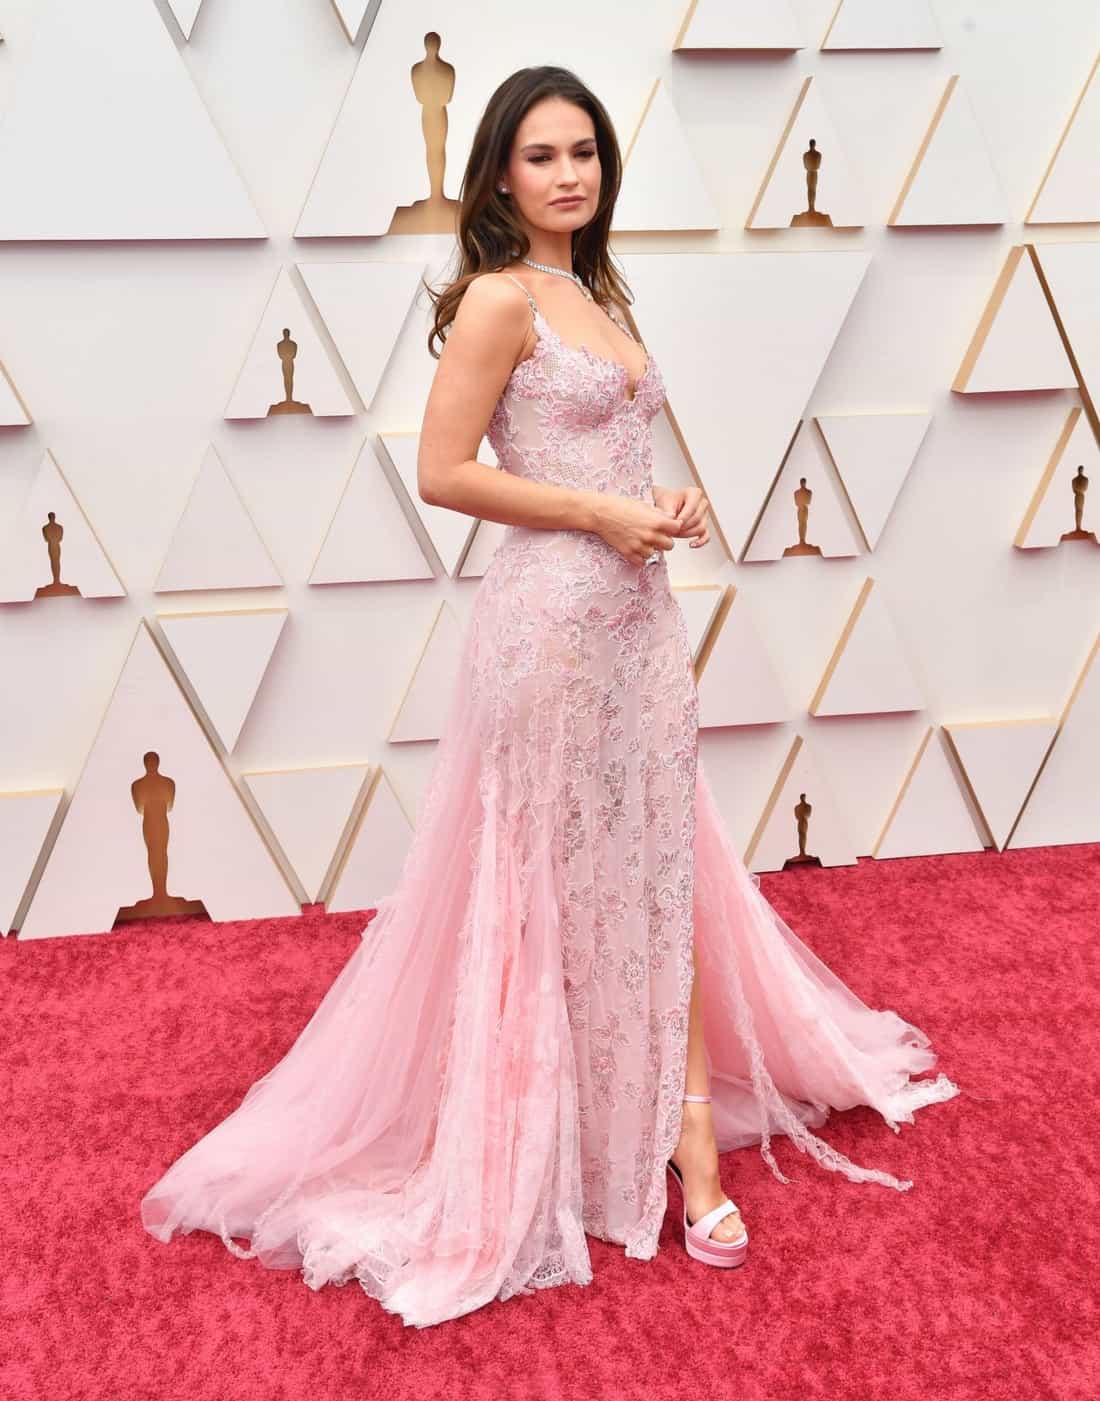 Lily James Looked Spectacular in a Pink Lace Dress at the 2022 Oscars